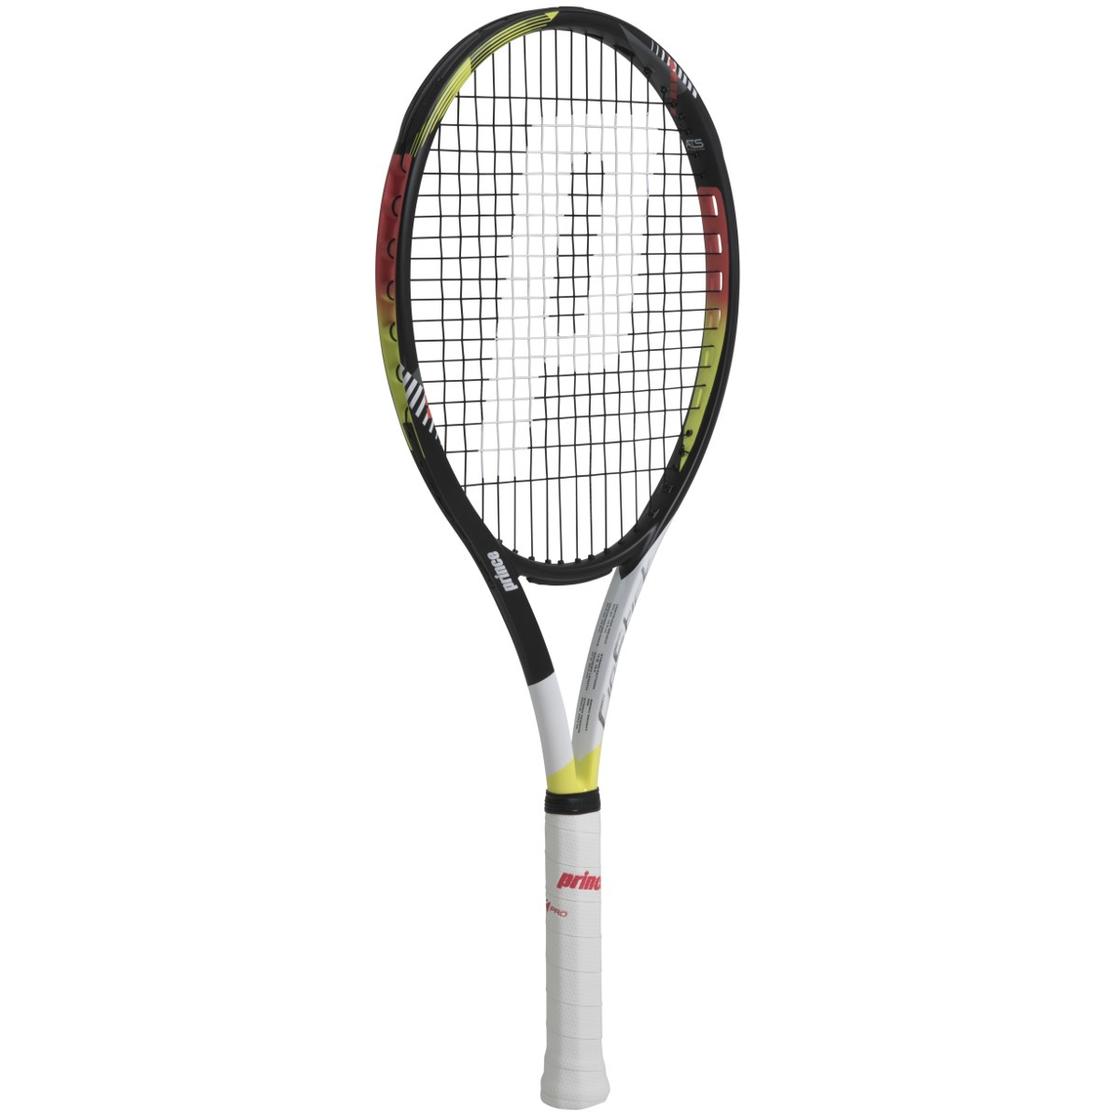 What size tennis racket is best for a beginner?